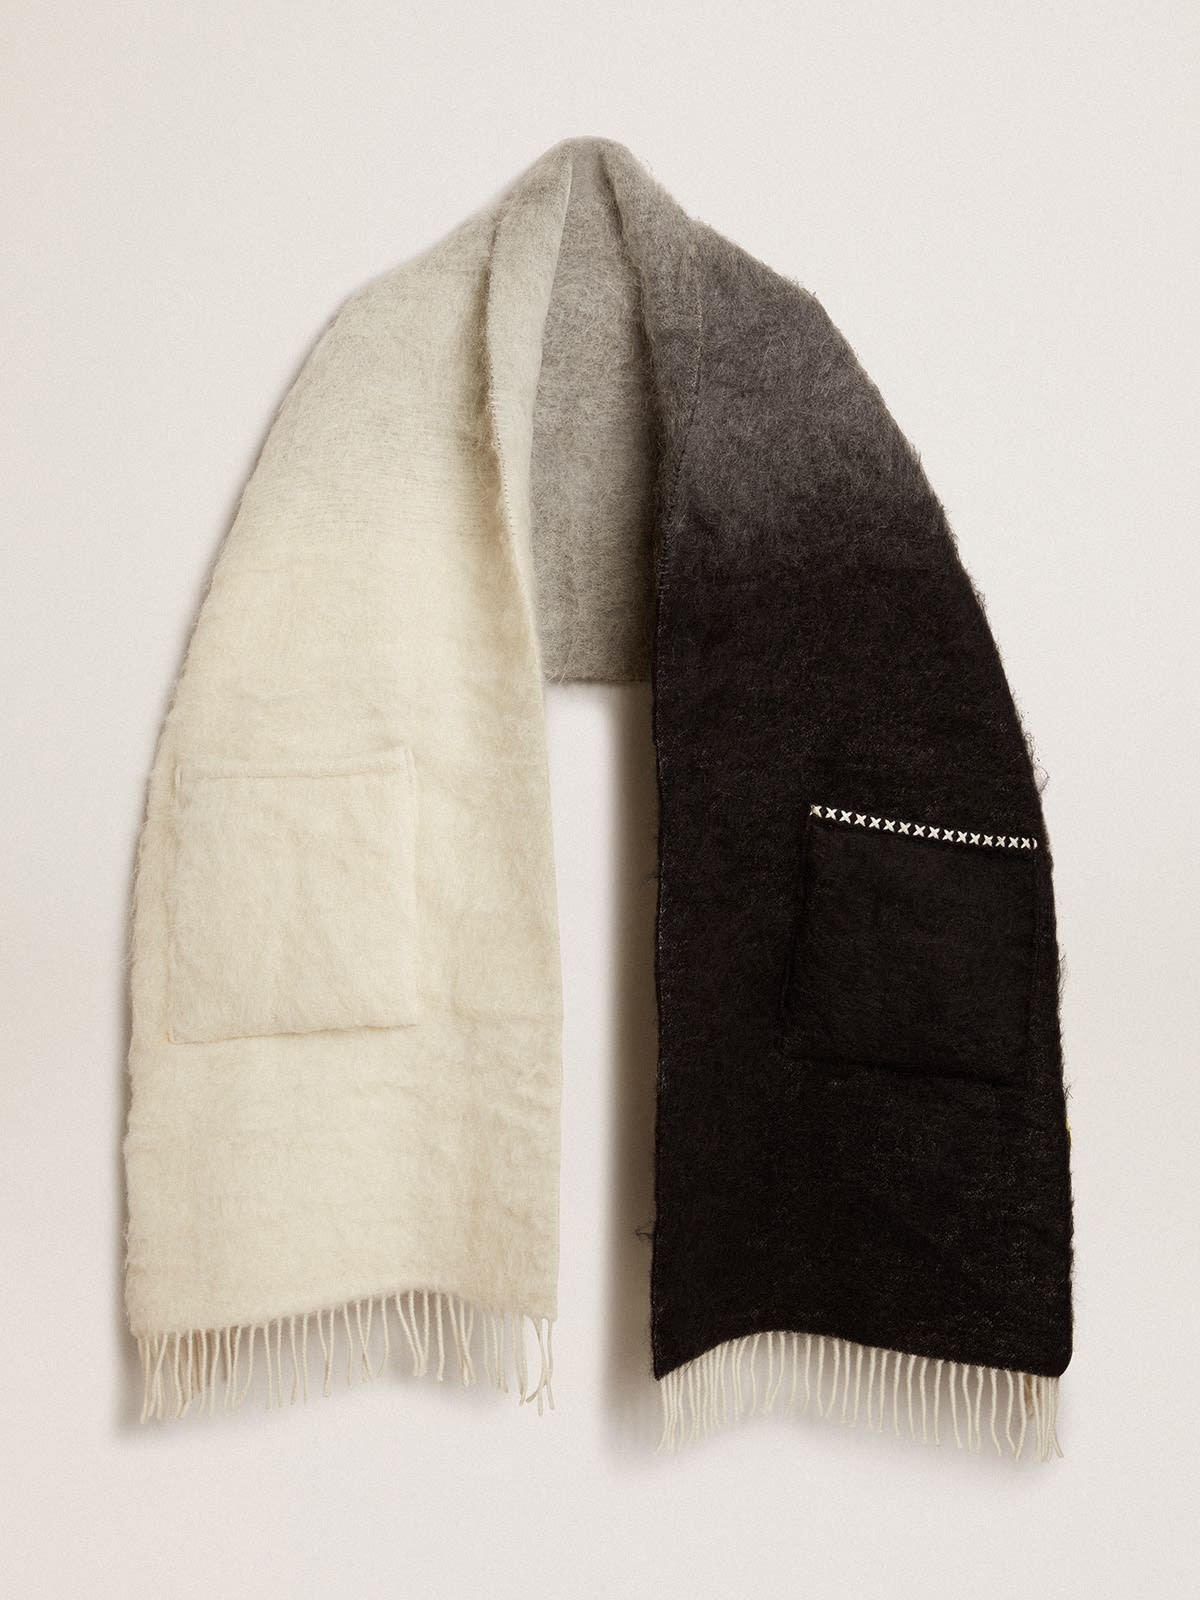 Black and white scarf with pockets - 1